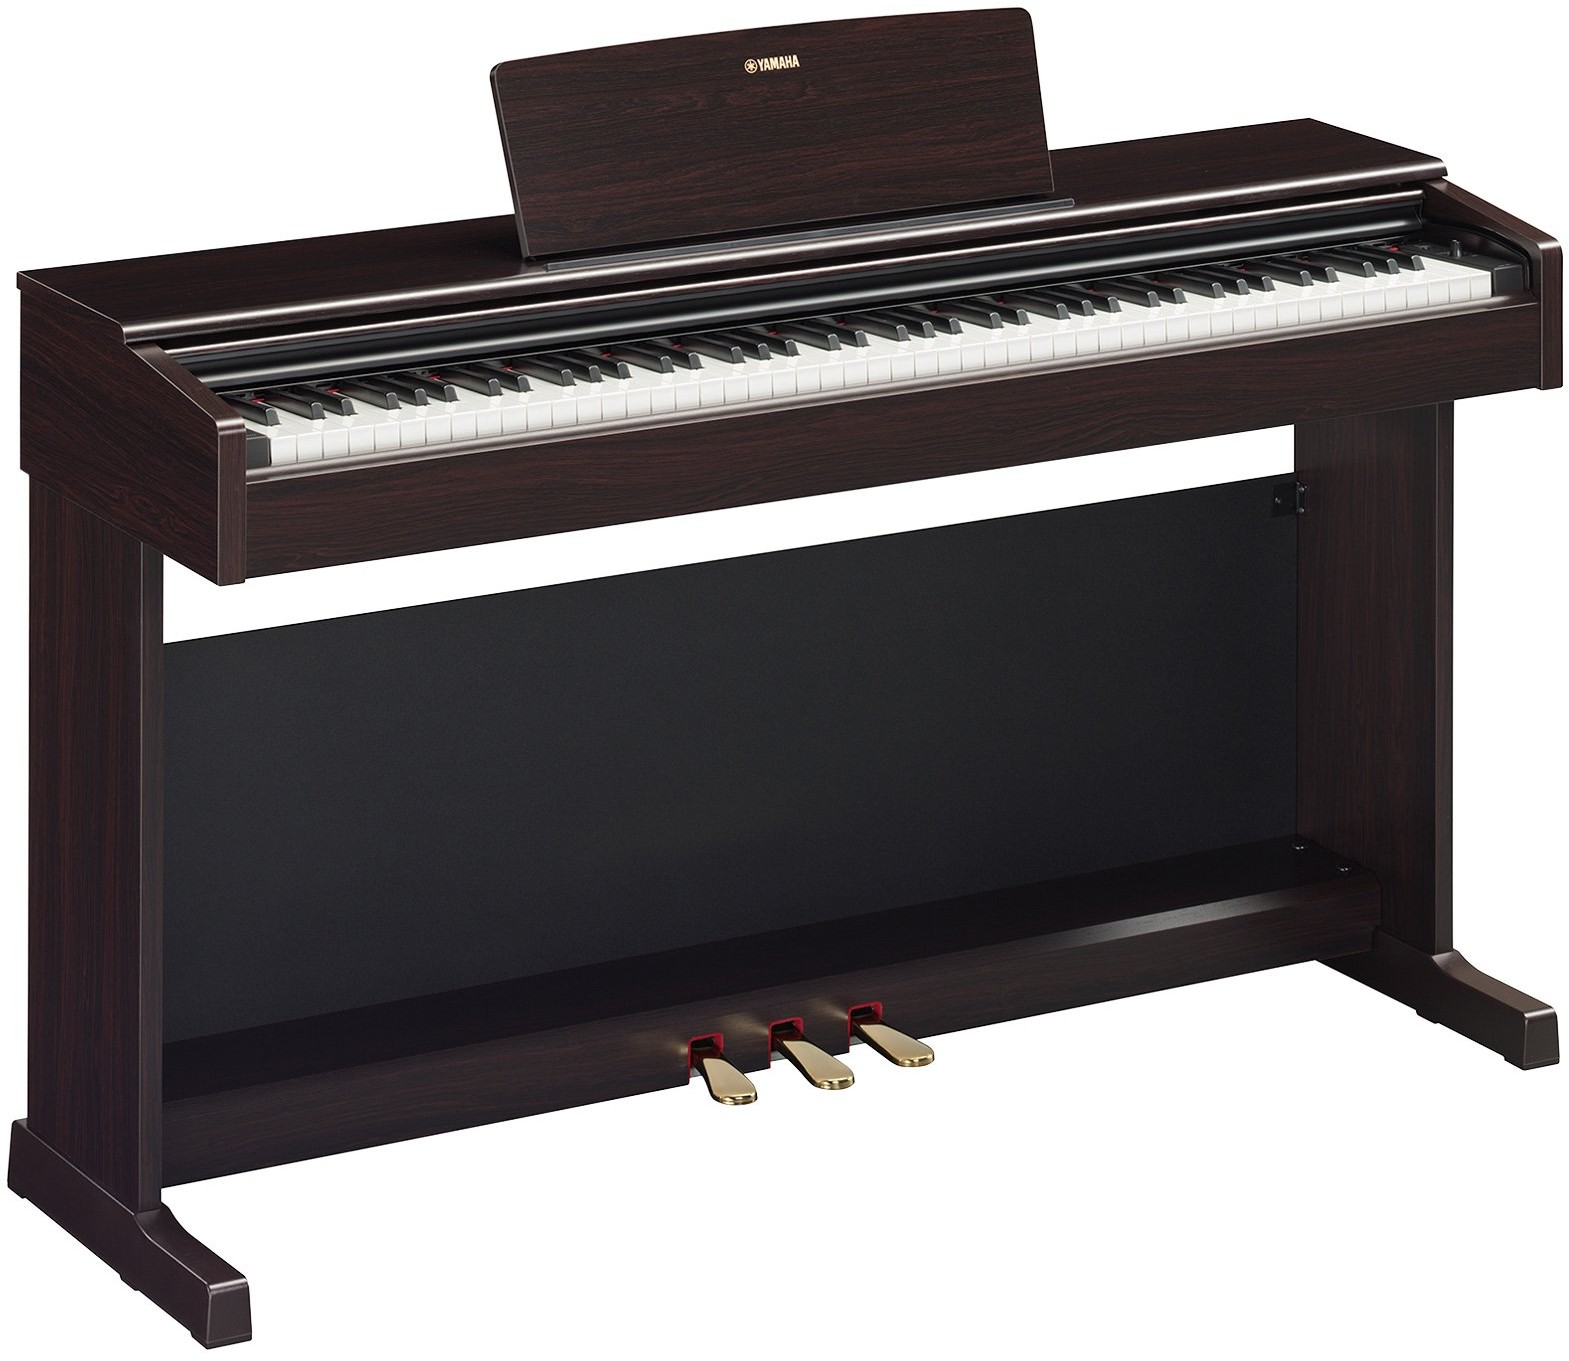 Yamaha Ydp-145 R - Digital piano with stand - Variation 1